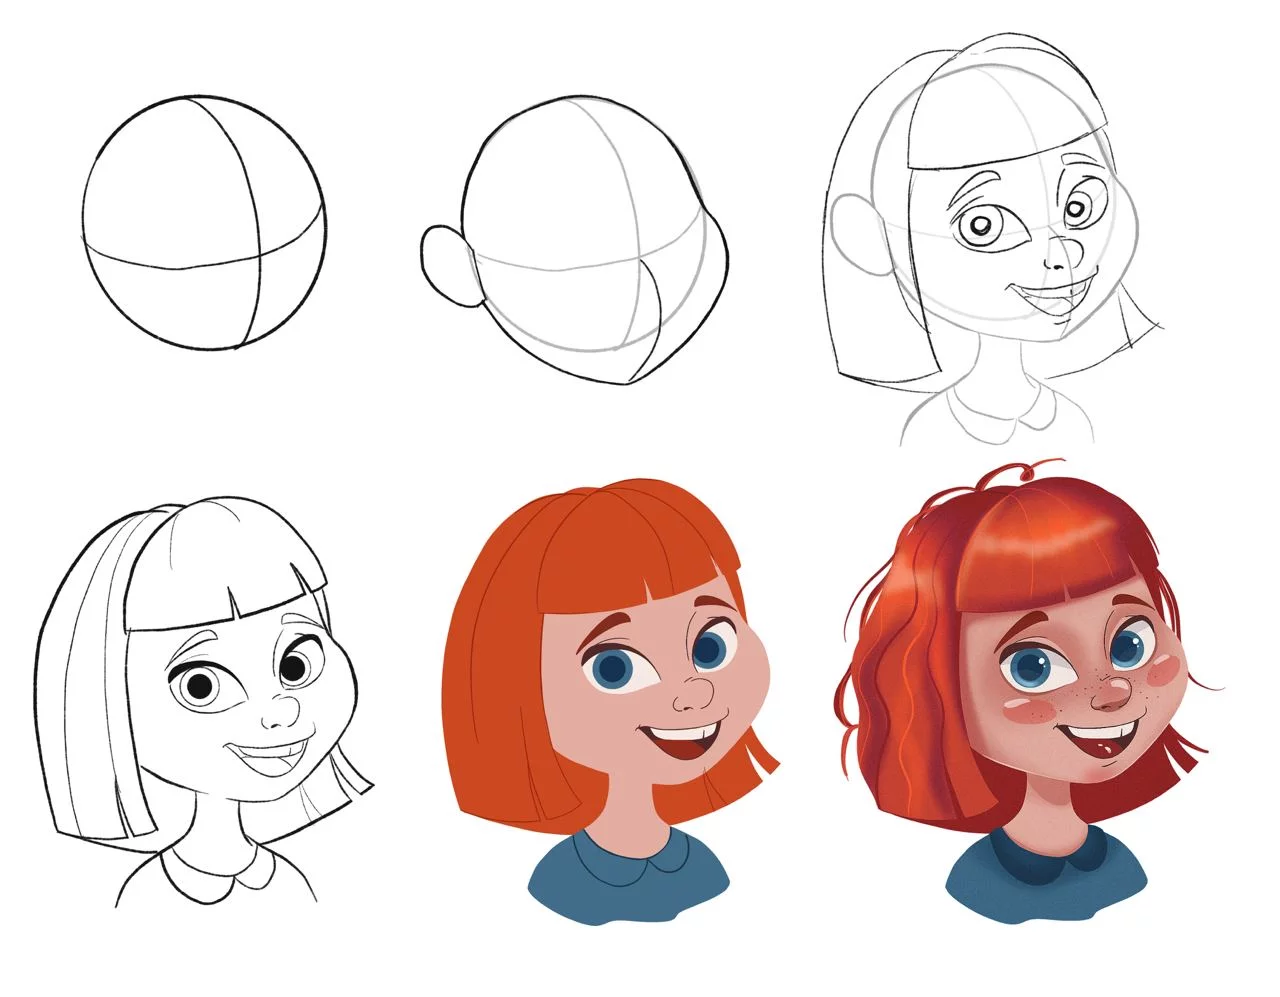 How to draw a human in cartoon style. Step by step instruction (8